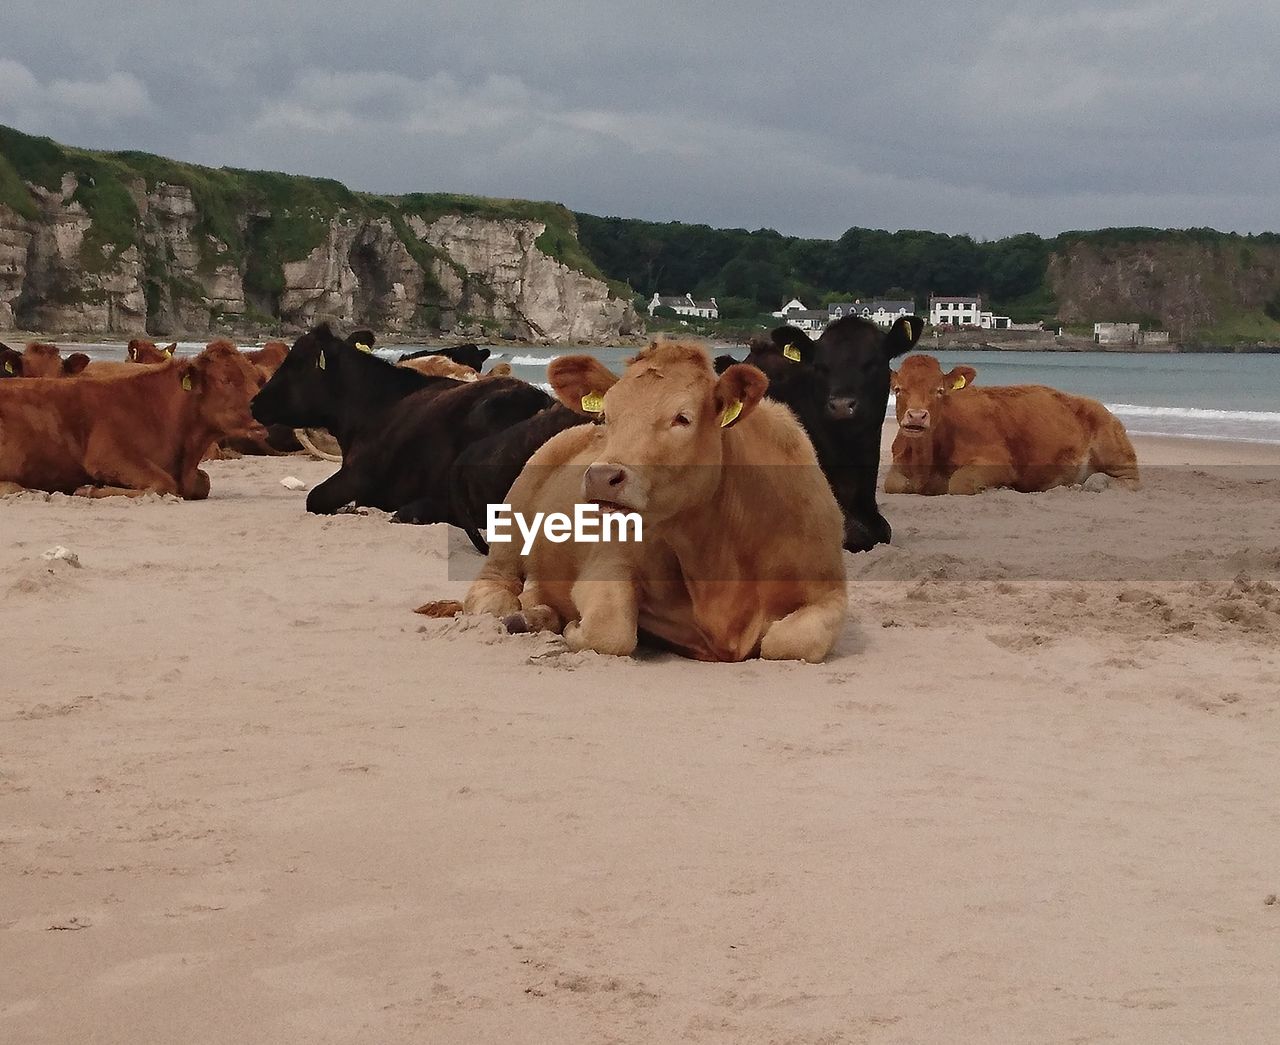 Cows relaxing on shore